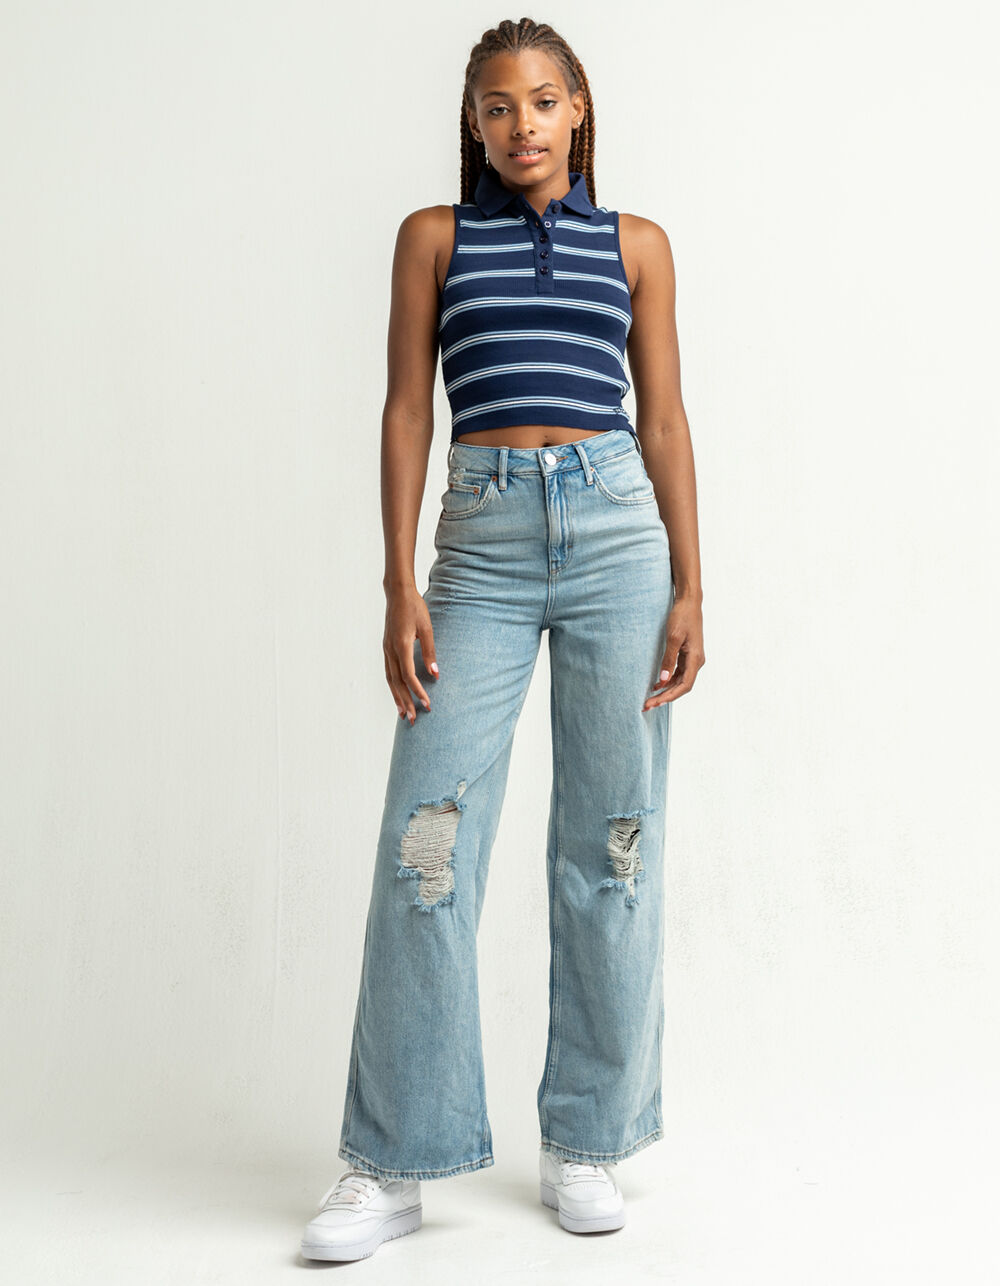 BDG Urban Outfitters Womens Puddle Jeans - LIGHT WASH | Tillys